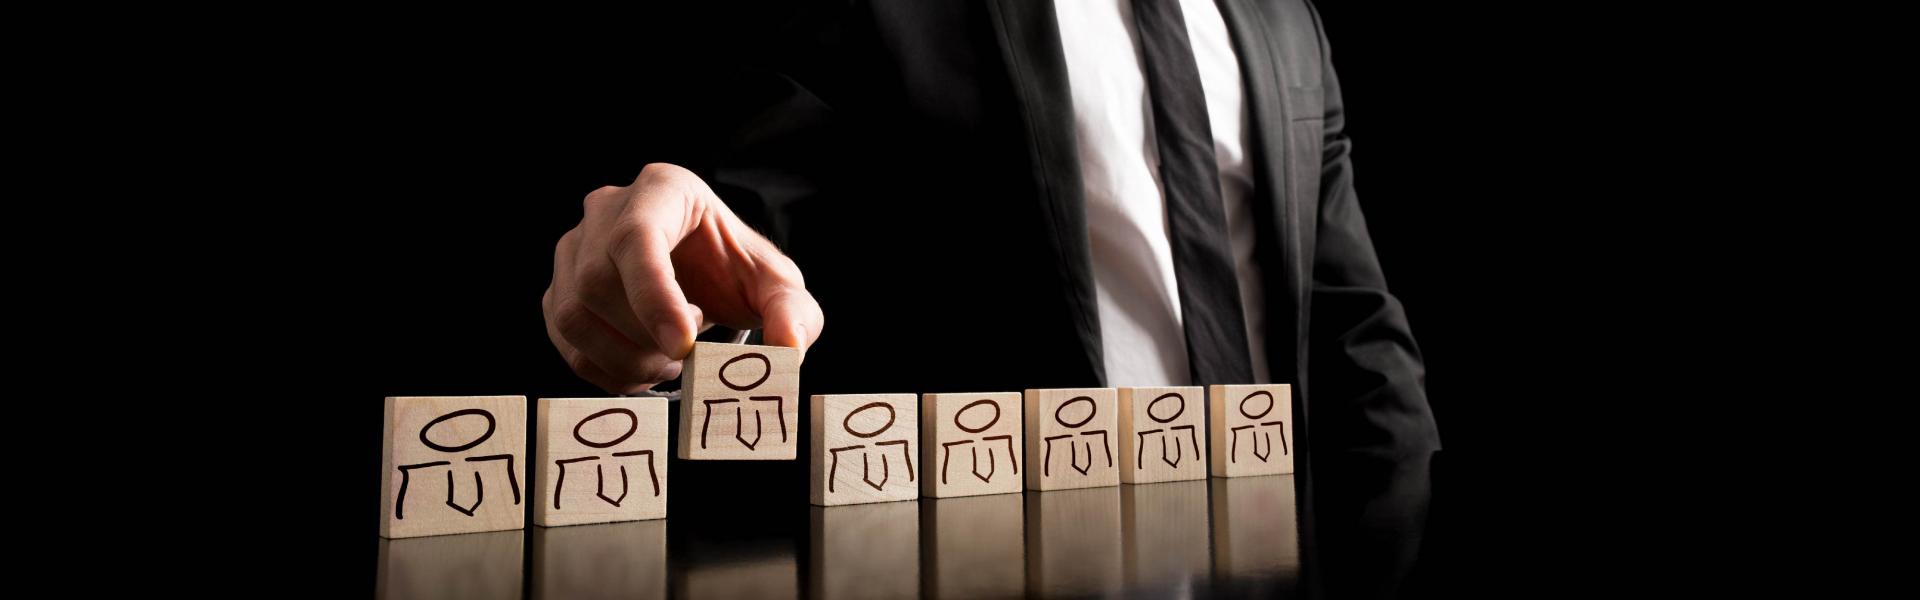 Streamlining Your Hiring Strategy: 8 Tips to Optimize RPO Provider Selection.